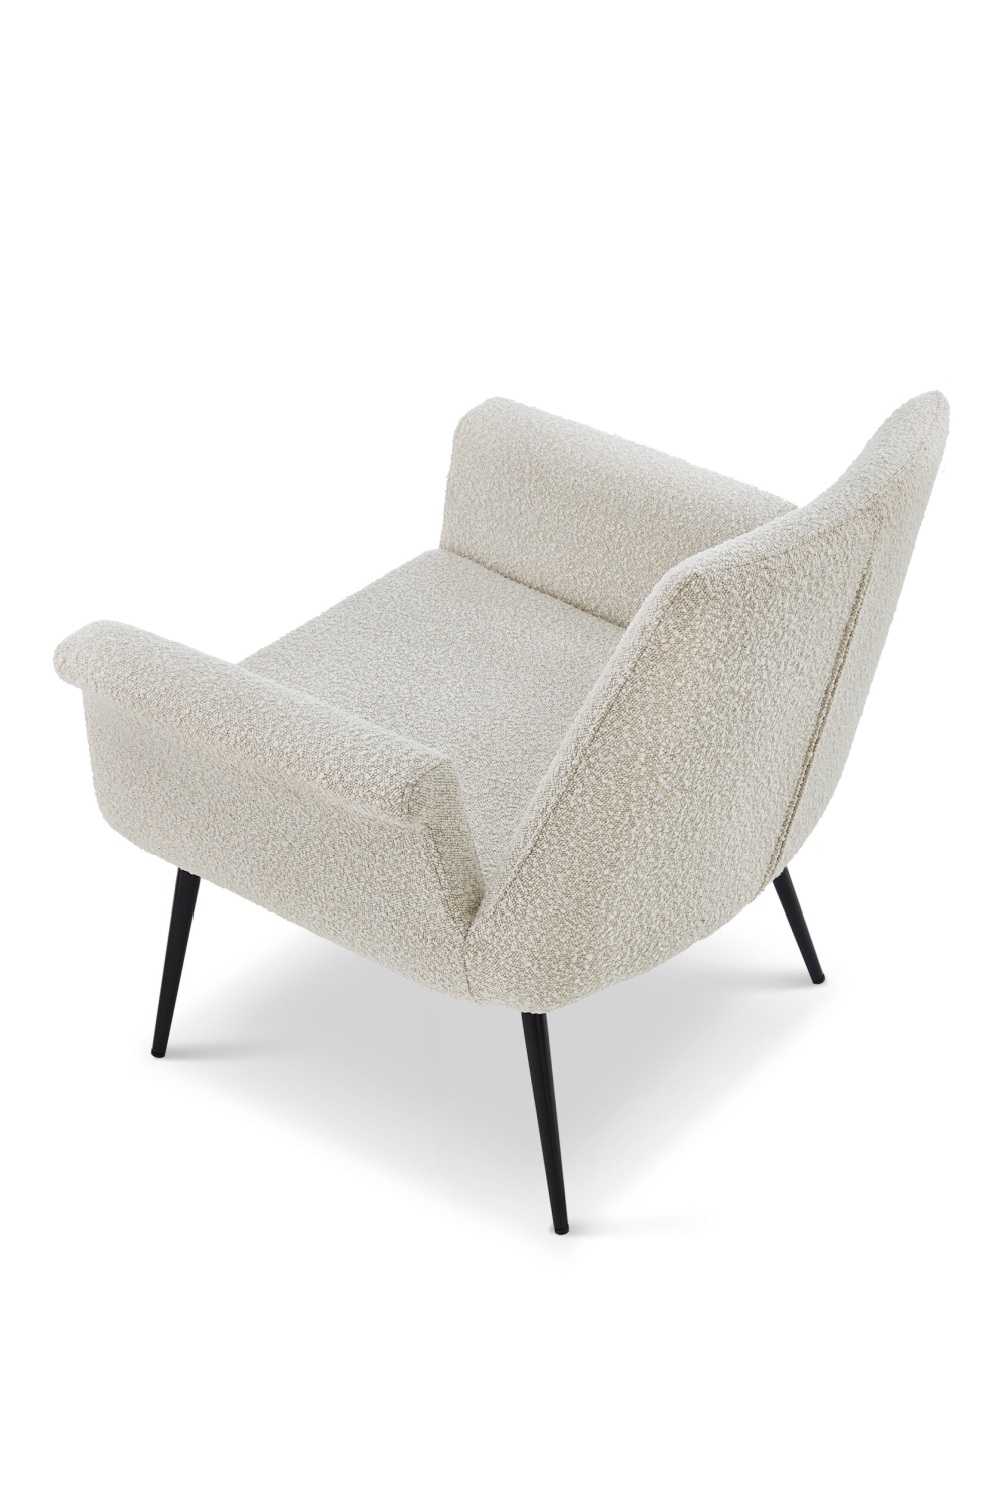 Classic Boucle Occasional Chair | Liang & Eimil Fiore | OROA.com